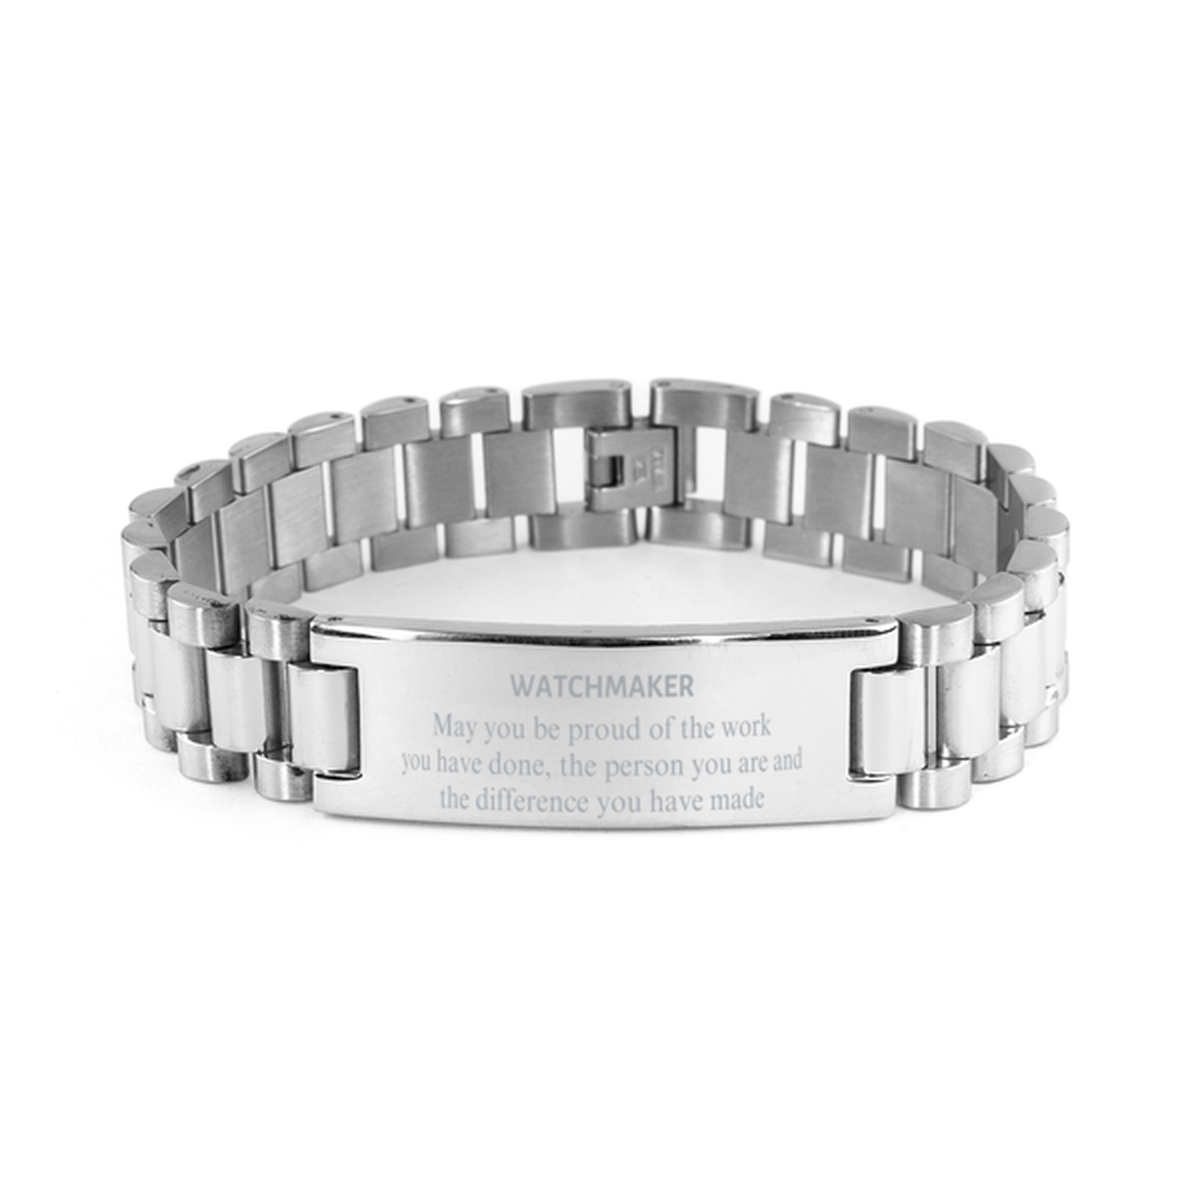 Watchmaker May you be proud of the work you have done, Retirement Watchmaker Ladder Stainless Steel Bracelet for Colleague Appreciation Gifts Amazing for Watchmaker